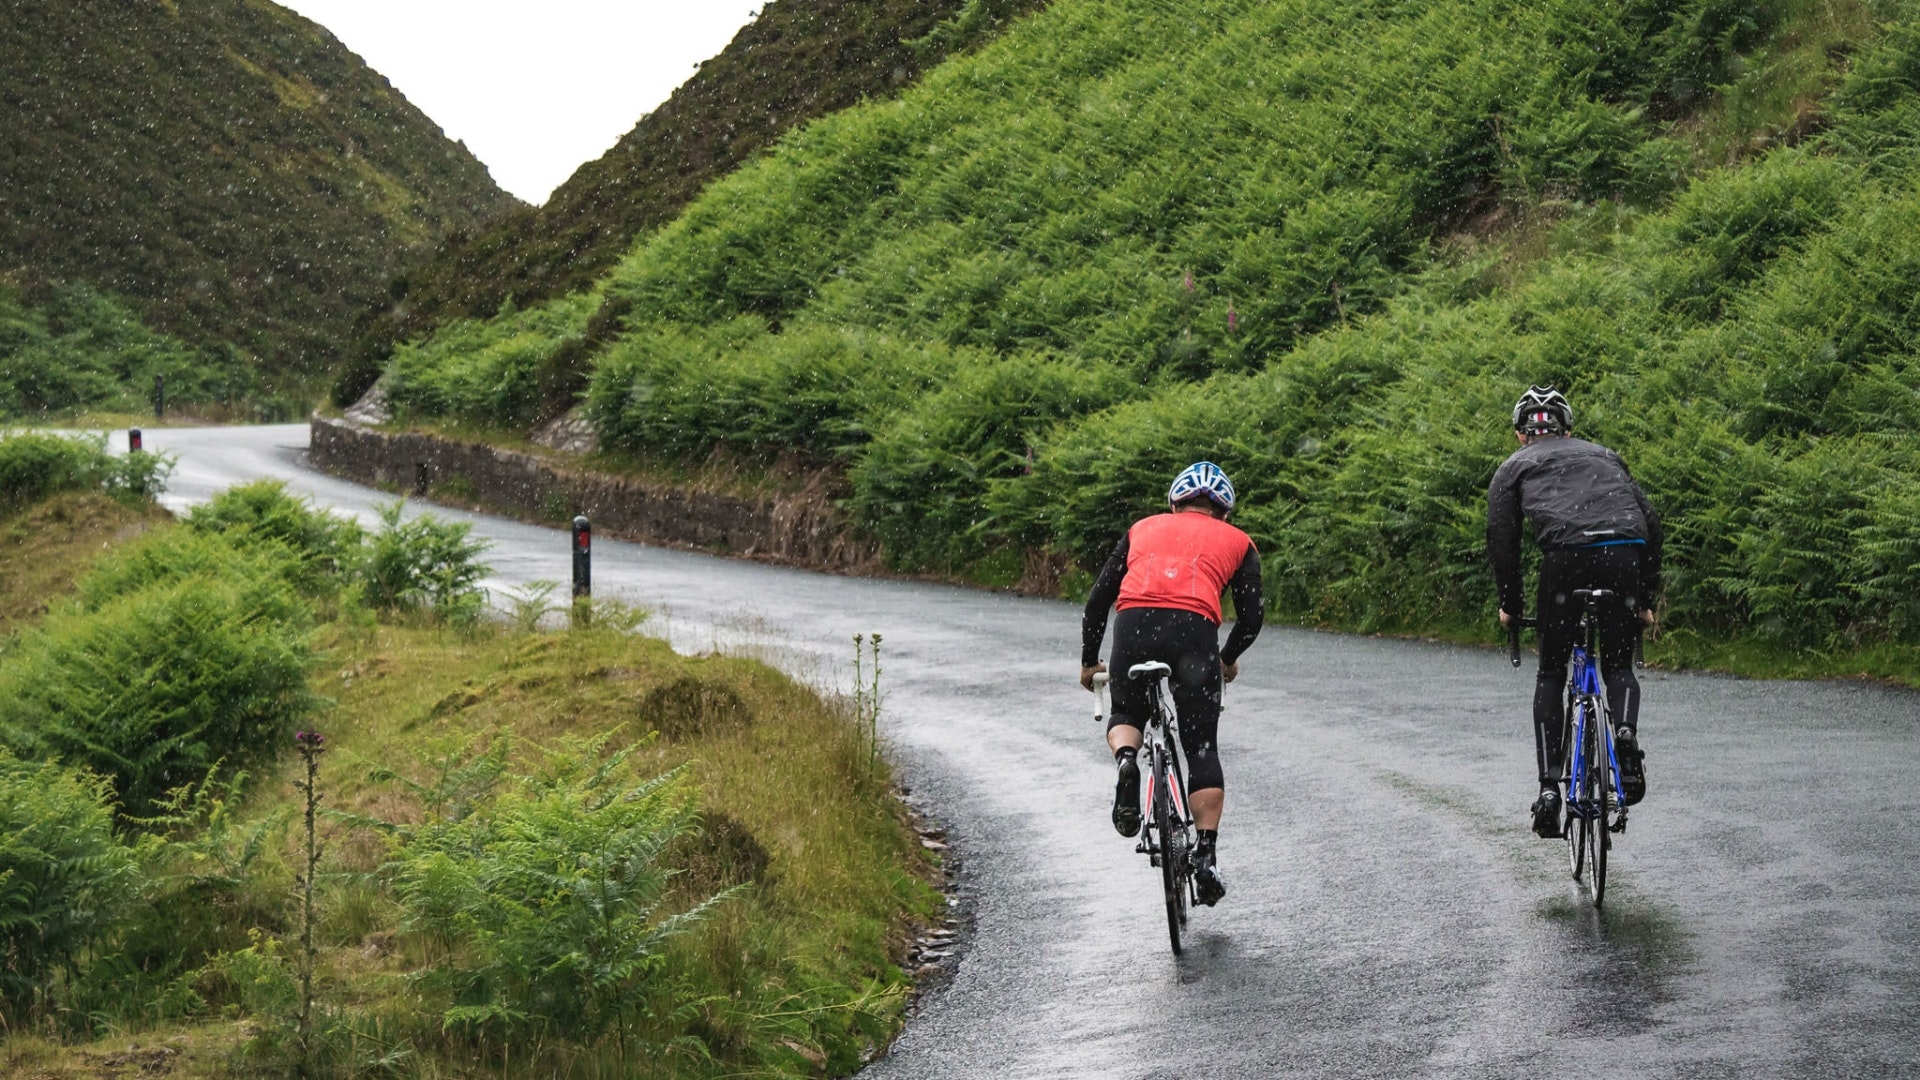 The UK has stunning riding on offer - but don't count on staying warm and dry (Pic: Scott Connor/Factory Media)